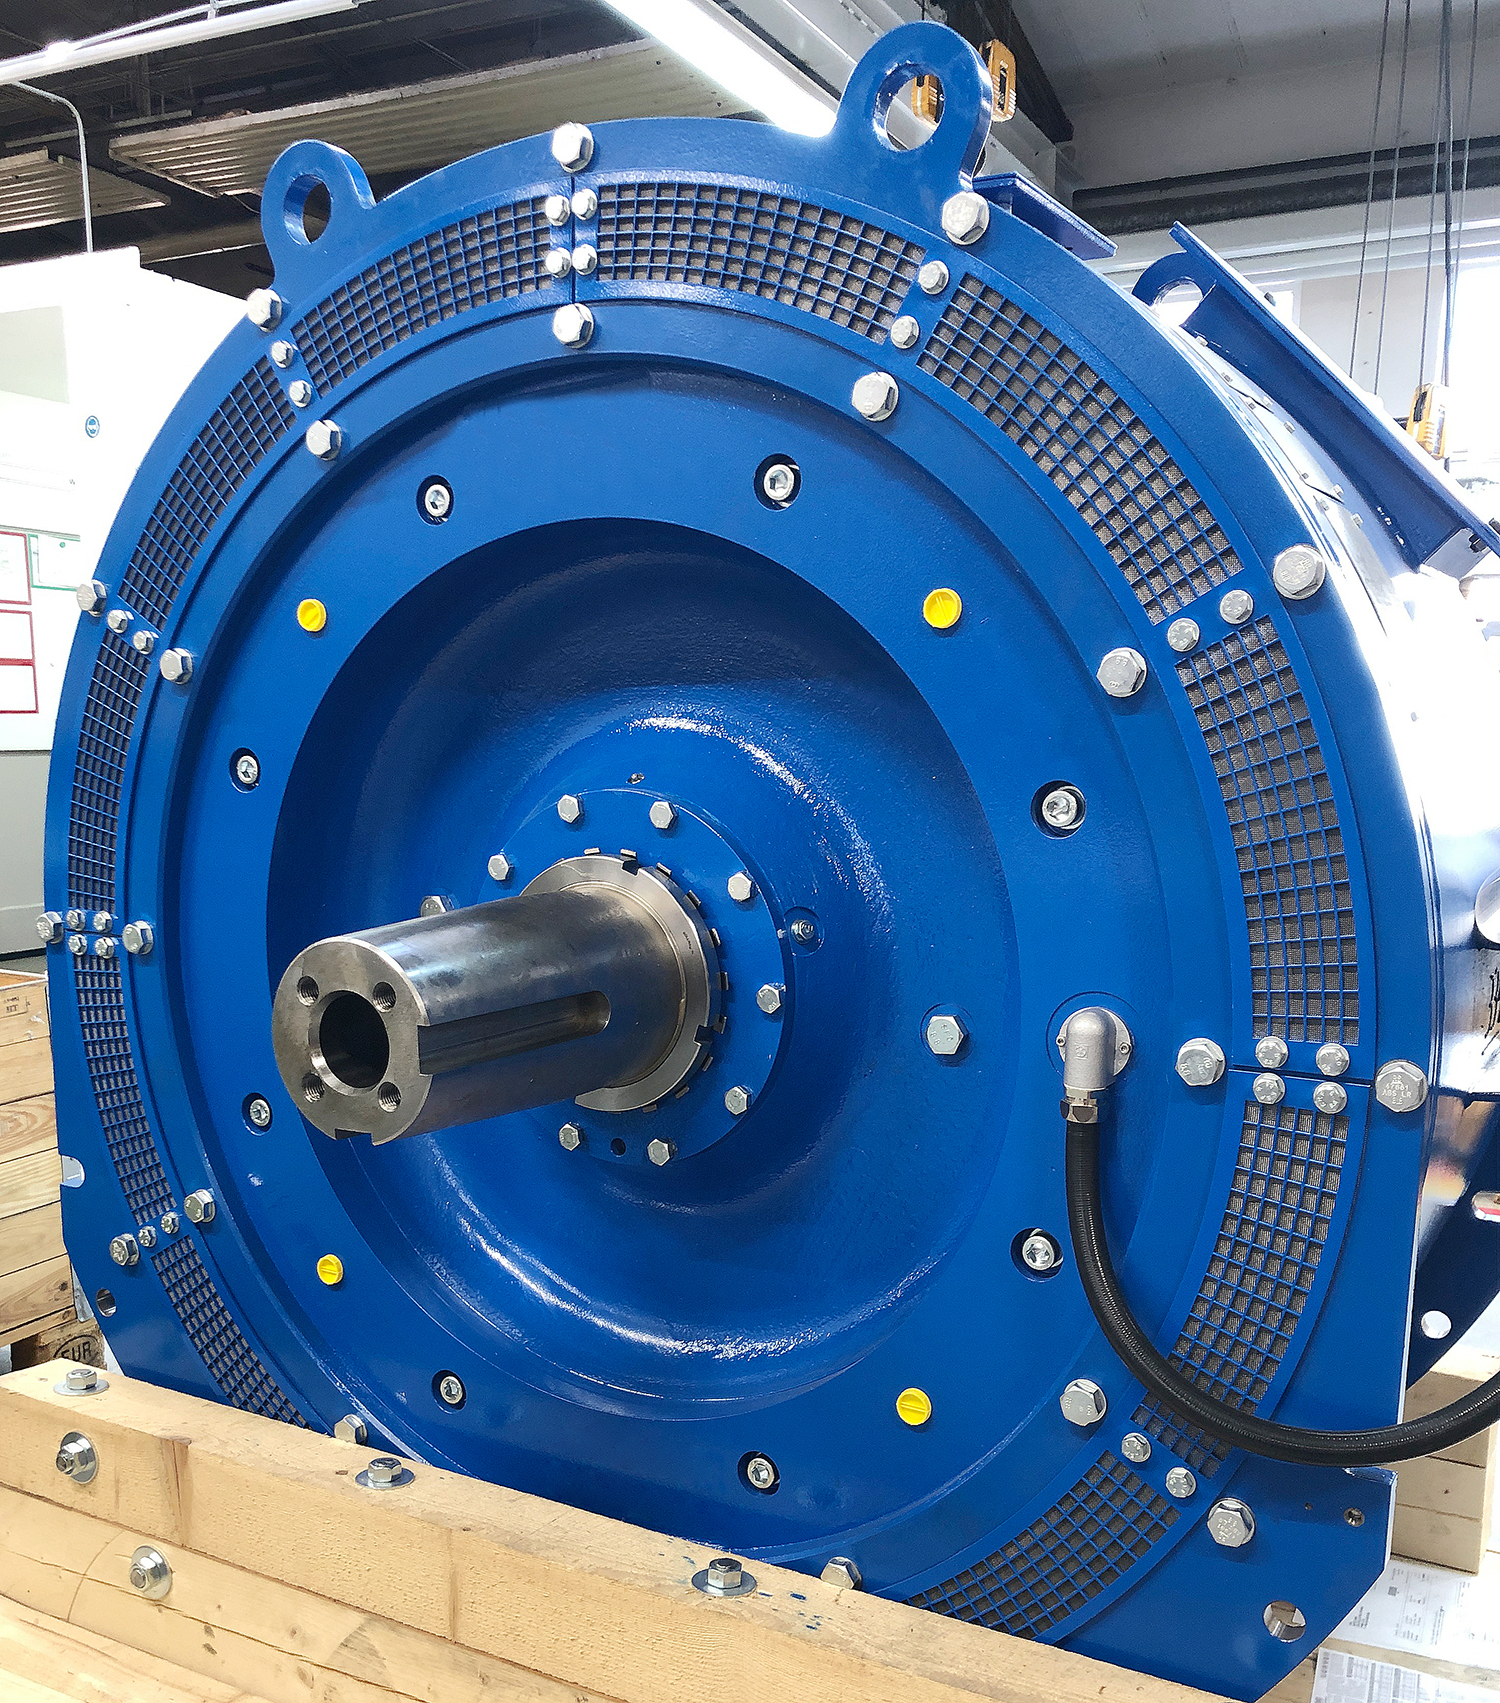 Stromag provided a custom eddy current brake to meet the specification of a bespoke drilling rig.